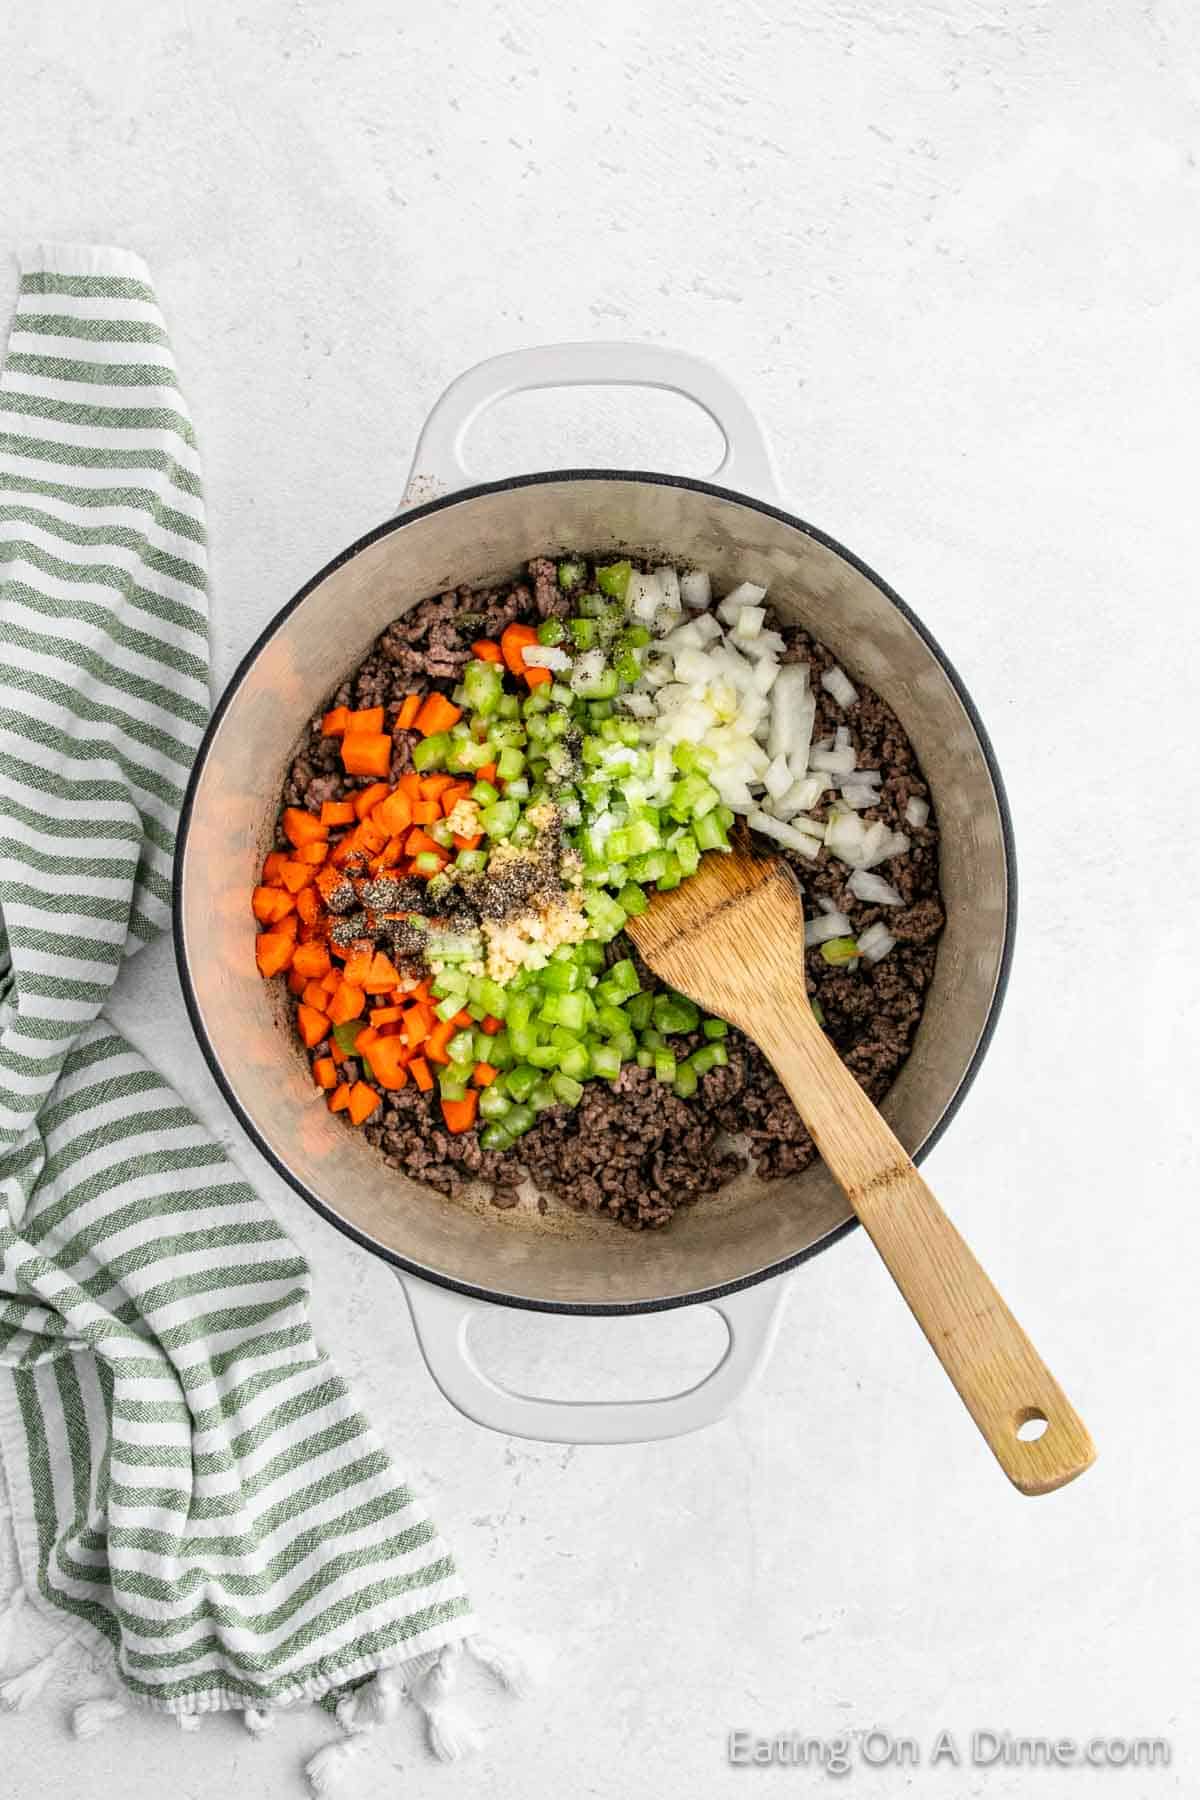 A pot on a light-colored surface containing browned ground beef, diced carrots, celery, and onions, with seasoning sprinkled on top—perfect for a hearty Pasta Fagioli Soup. A wooden spoon rests inside the pot. A green and white striped towel is placed beside it.